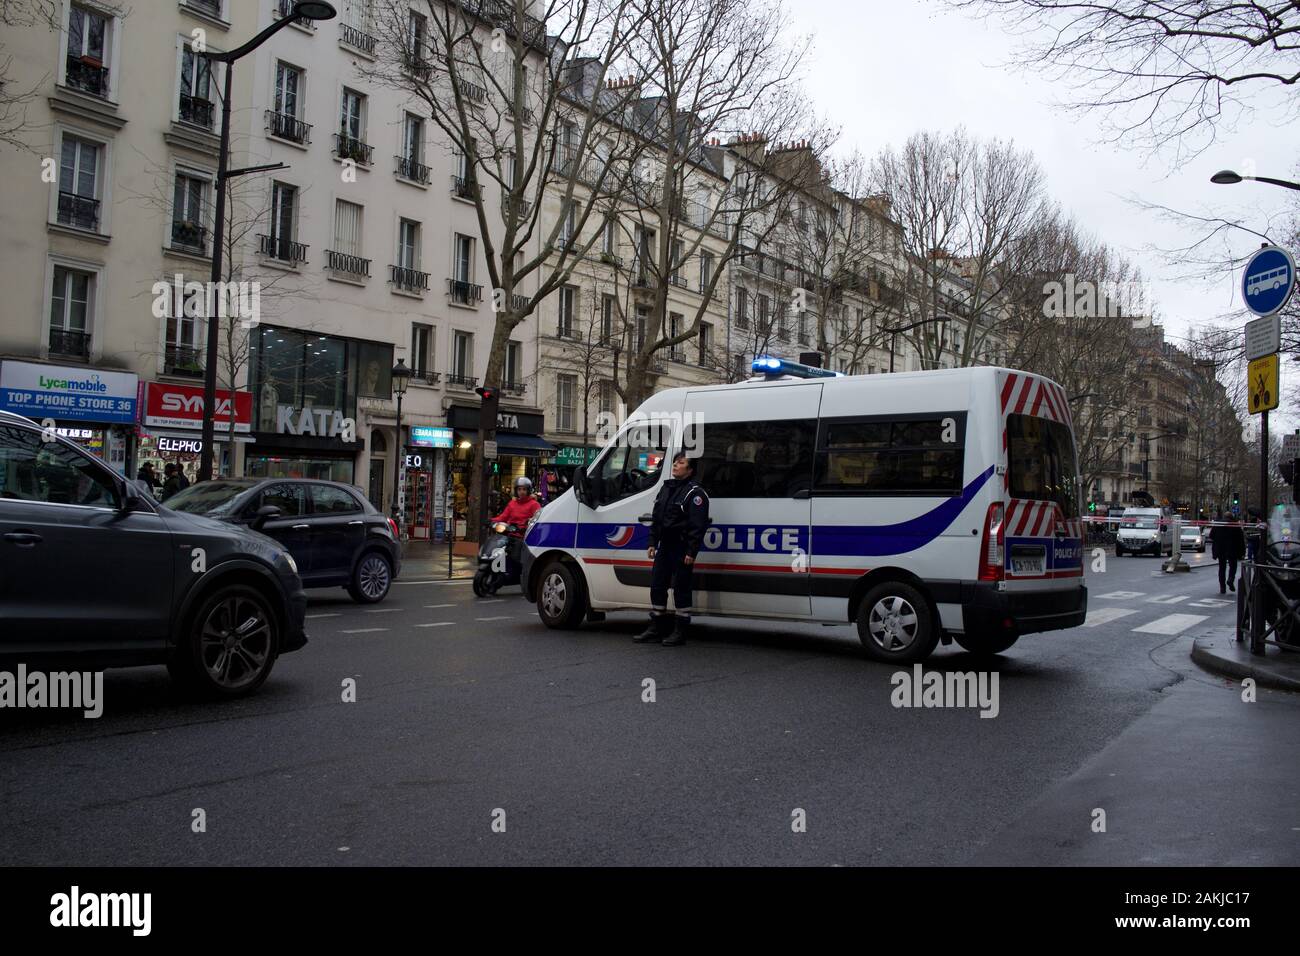 French police van parked in road, closing road to traffic, as police officer stands by, in anticipation of protests due to government's proposed pension reforms, causing travel disruption, Paris strike (la grève), boulevard Barbès, 75018, Paris, France, 9th January 2020 Stock Photo